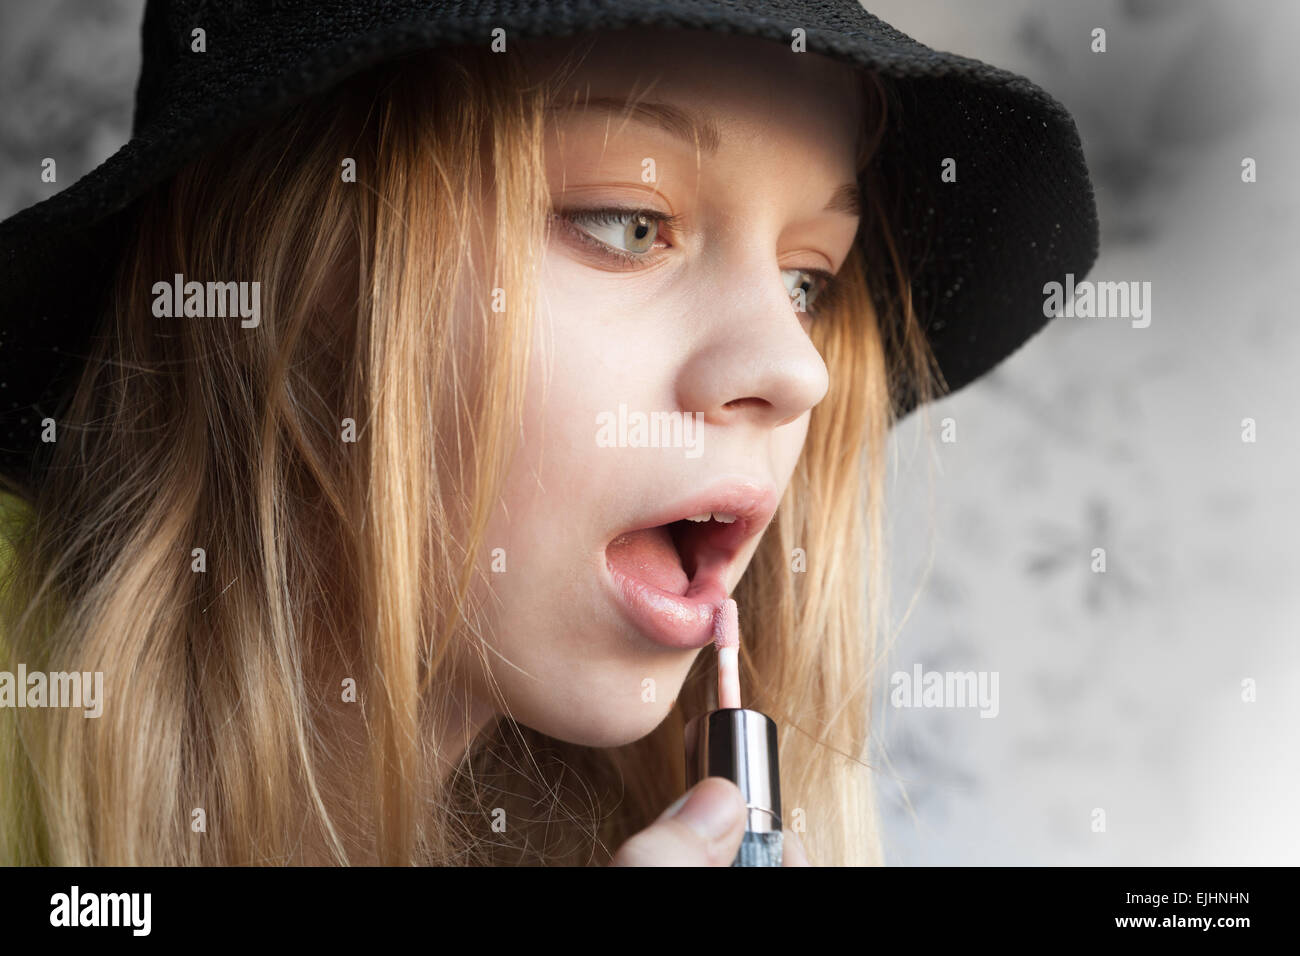 Portrait of beautiful blond teenage girl in black hat doing make up with liquid lipstick Stock Photo